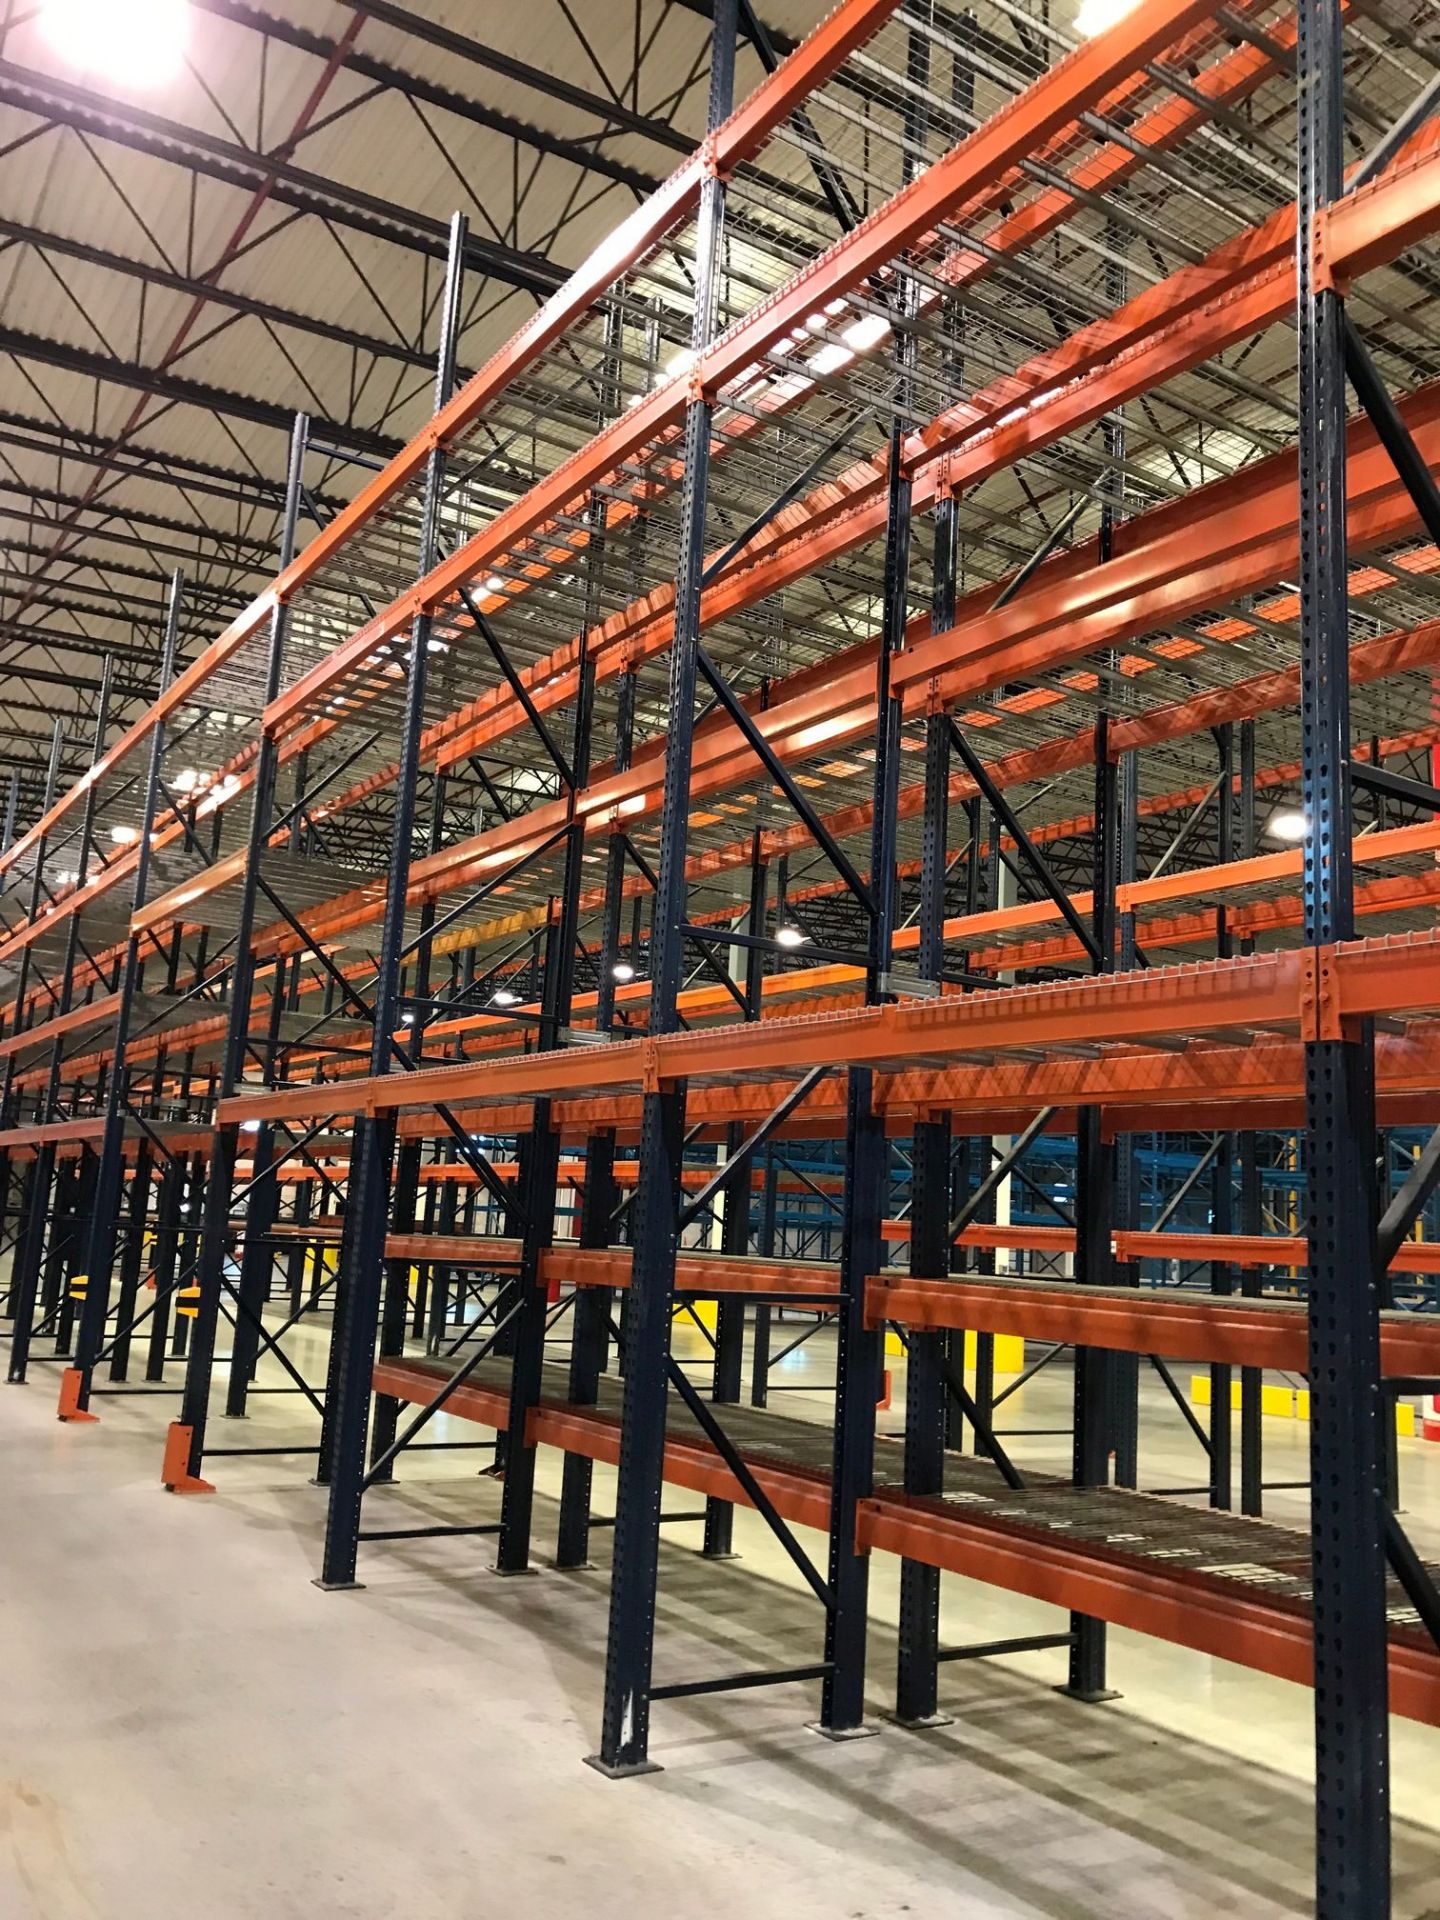 SECTIONS 60" X 108" X 288" TEARDROP TYPE ADJUSTABLE BEAM PALLET RACK WITH WIRE DECKING, 6" HIGH - Image 6 of 14